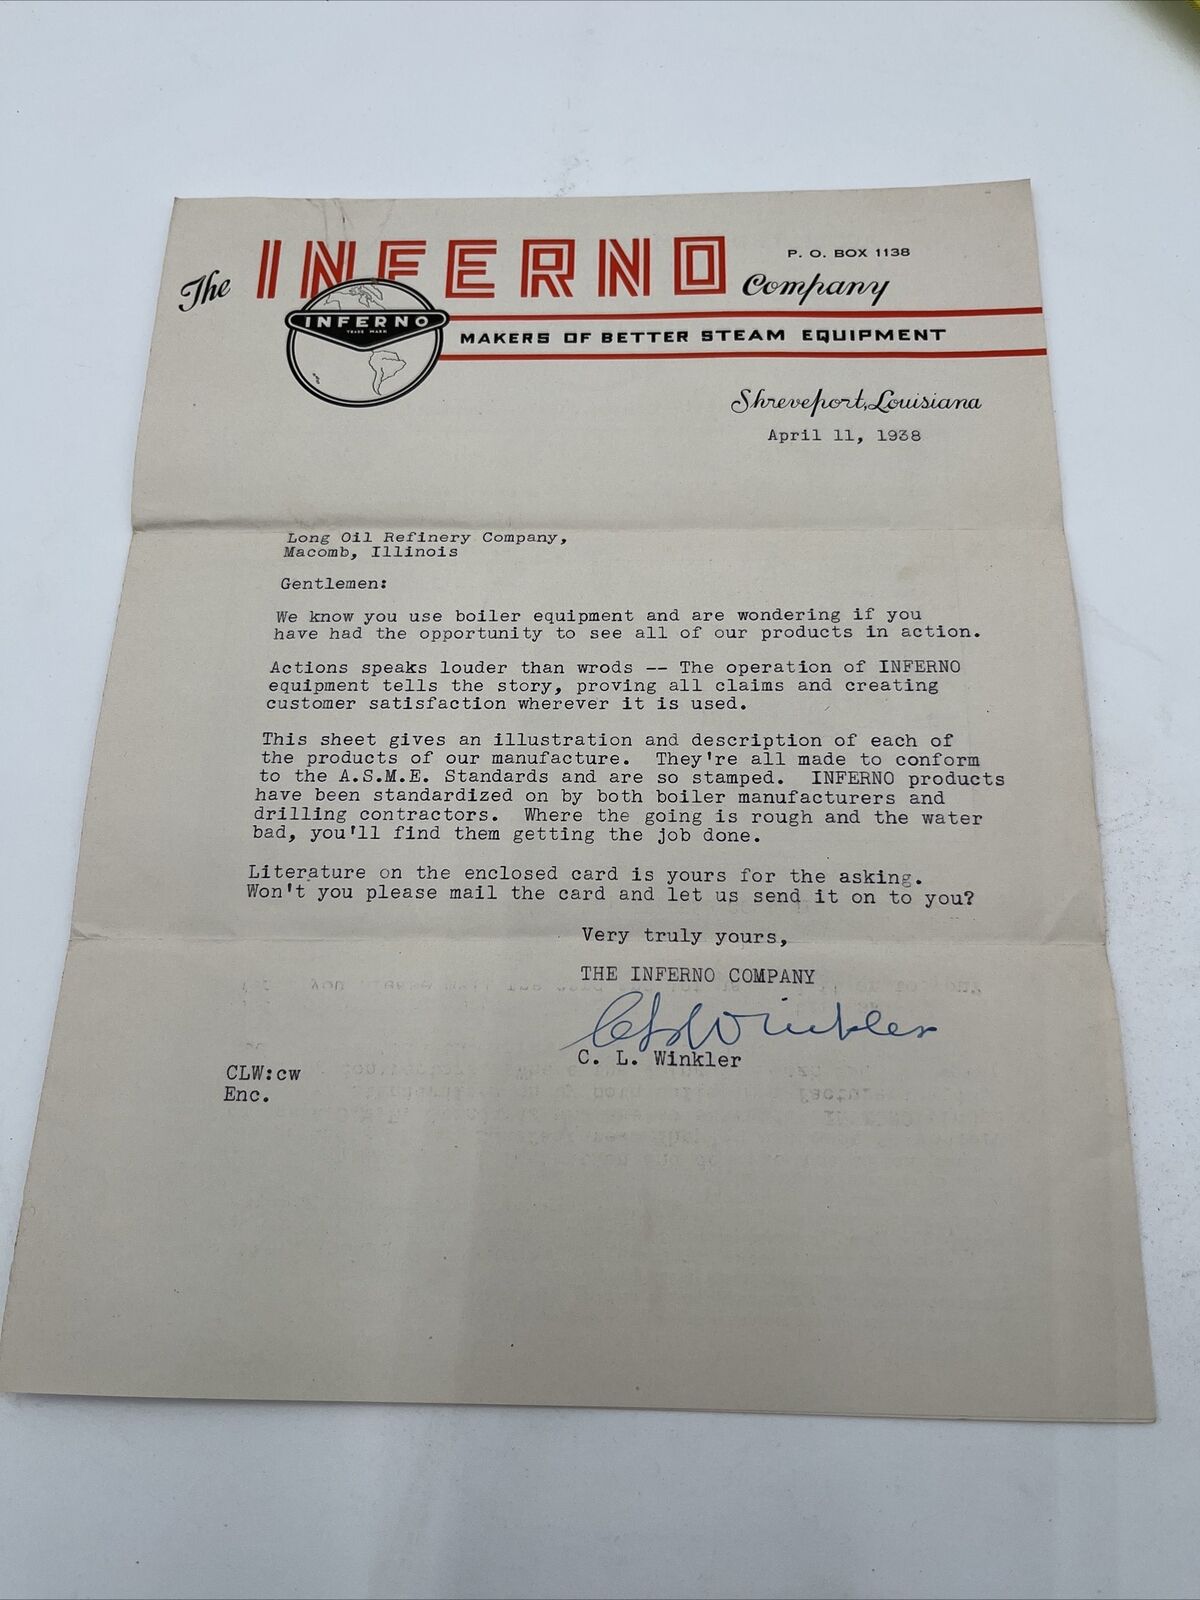 Vintage 1938 Long Oil Refinery Co Macomb Illinois Letter From The Inferno Co. La